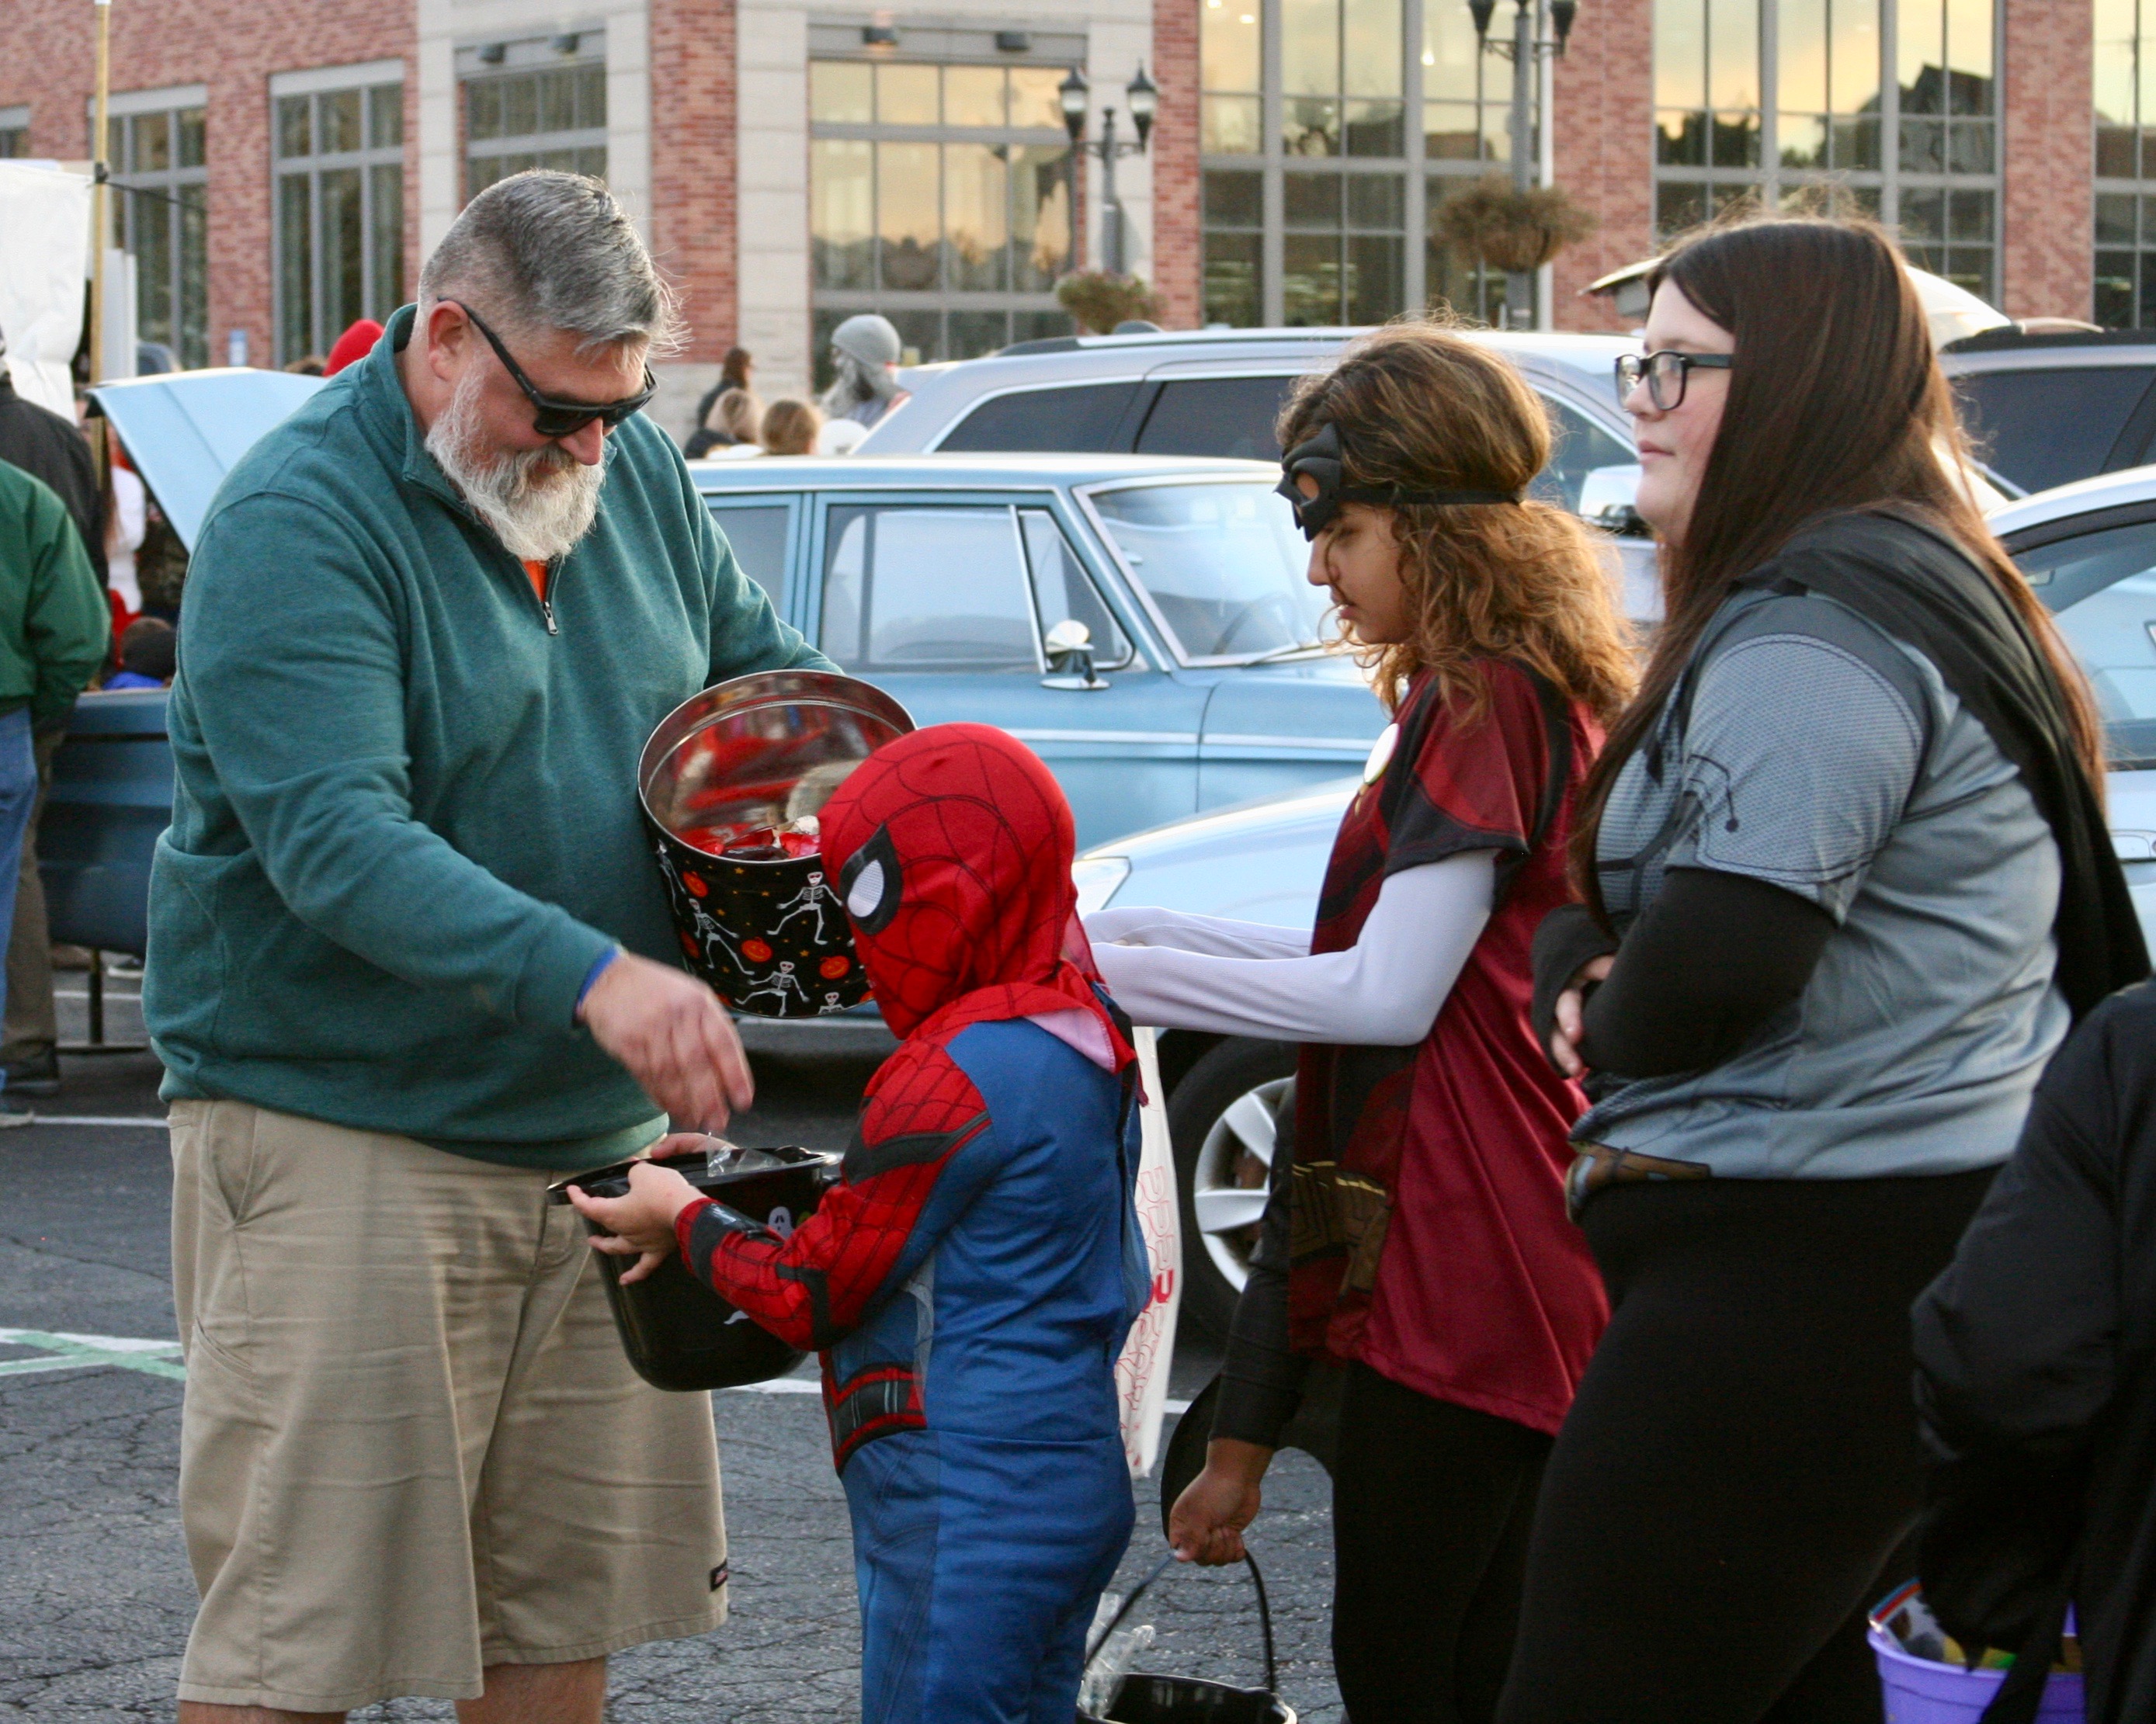 Man gives candy to child dressed as Spiderman